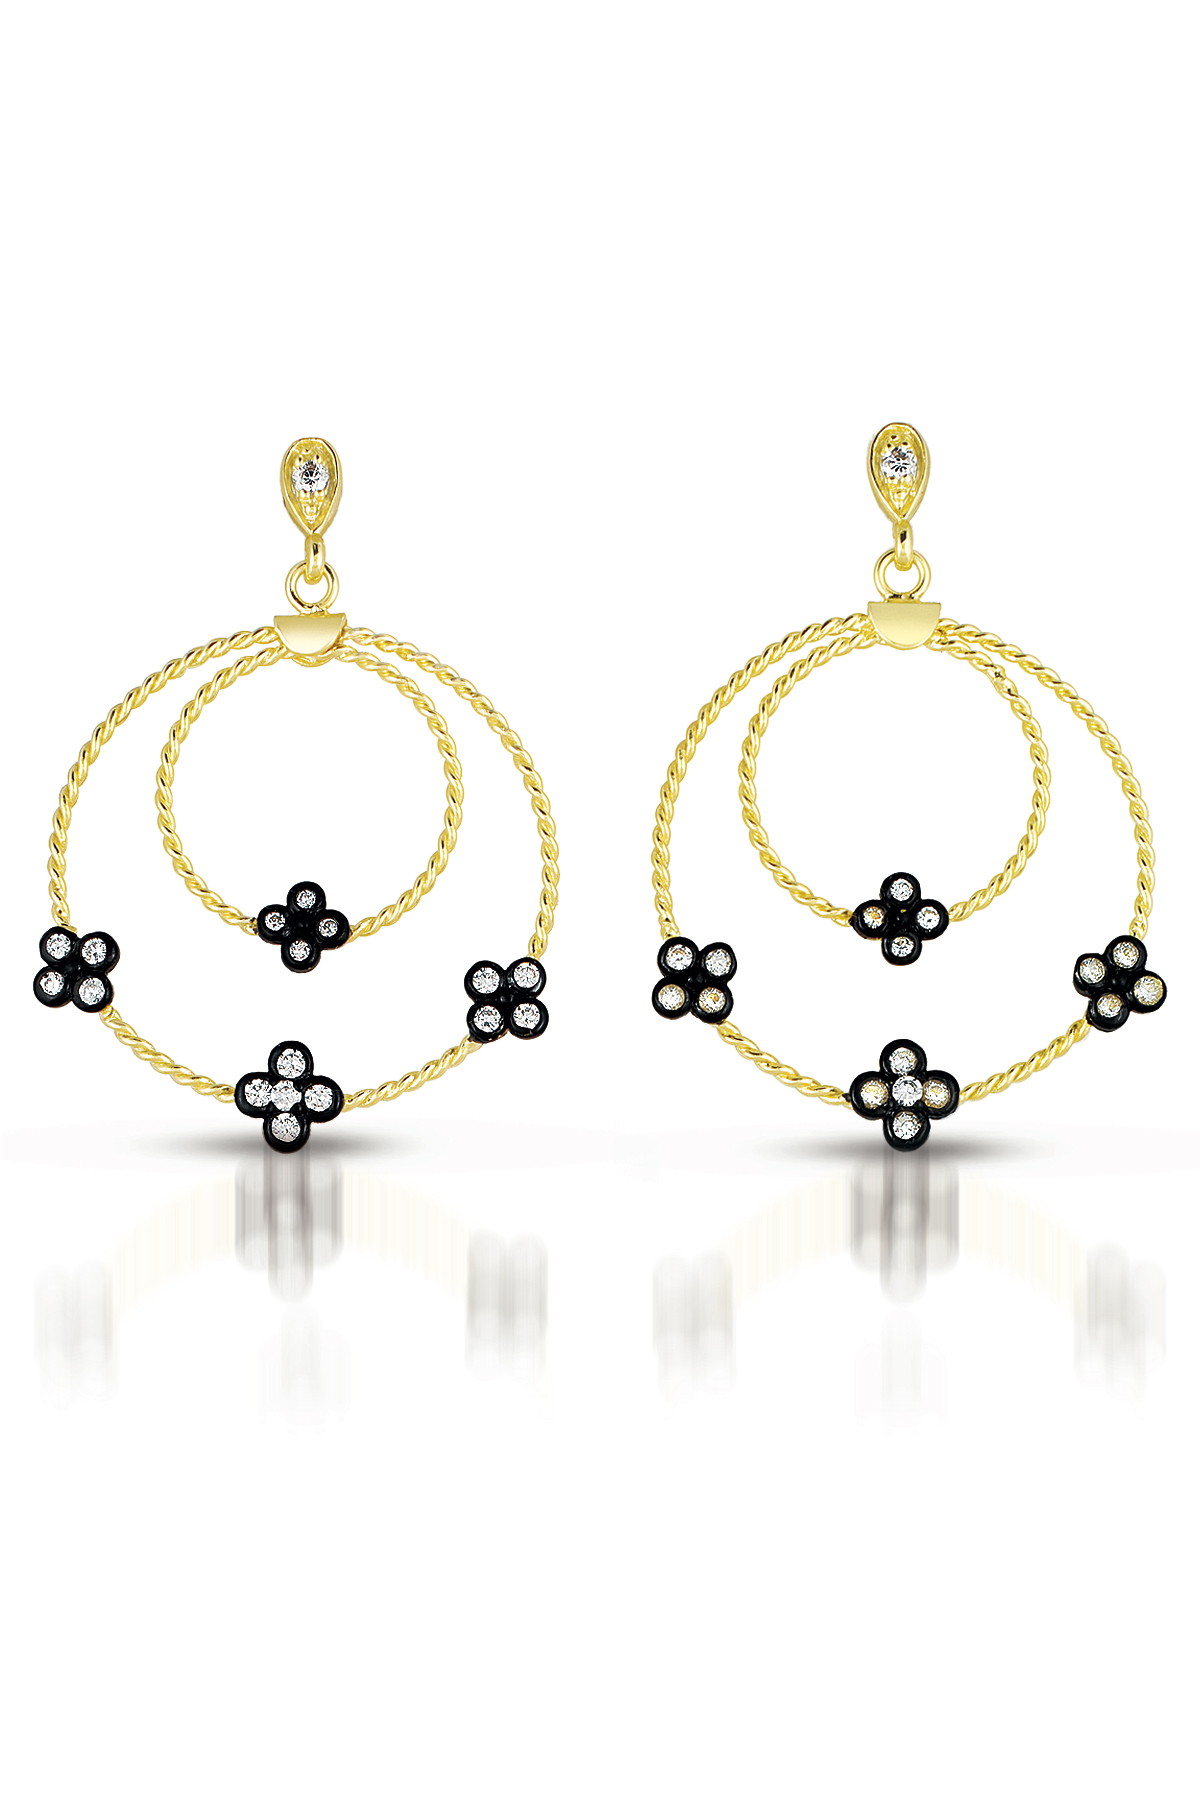 Cubic Zirconia (.925) Sterling Silver Gold And Black Round Drop Earrings